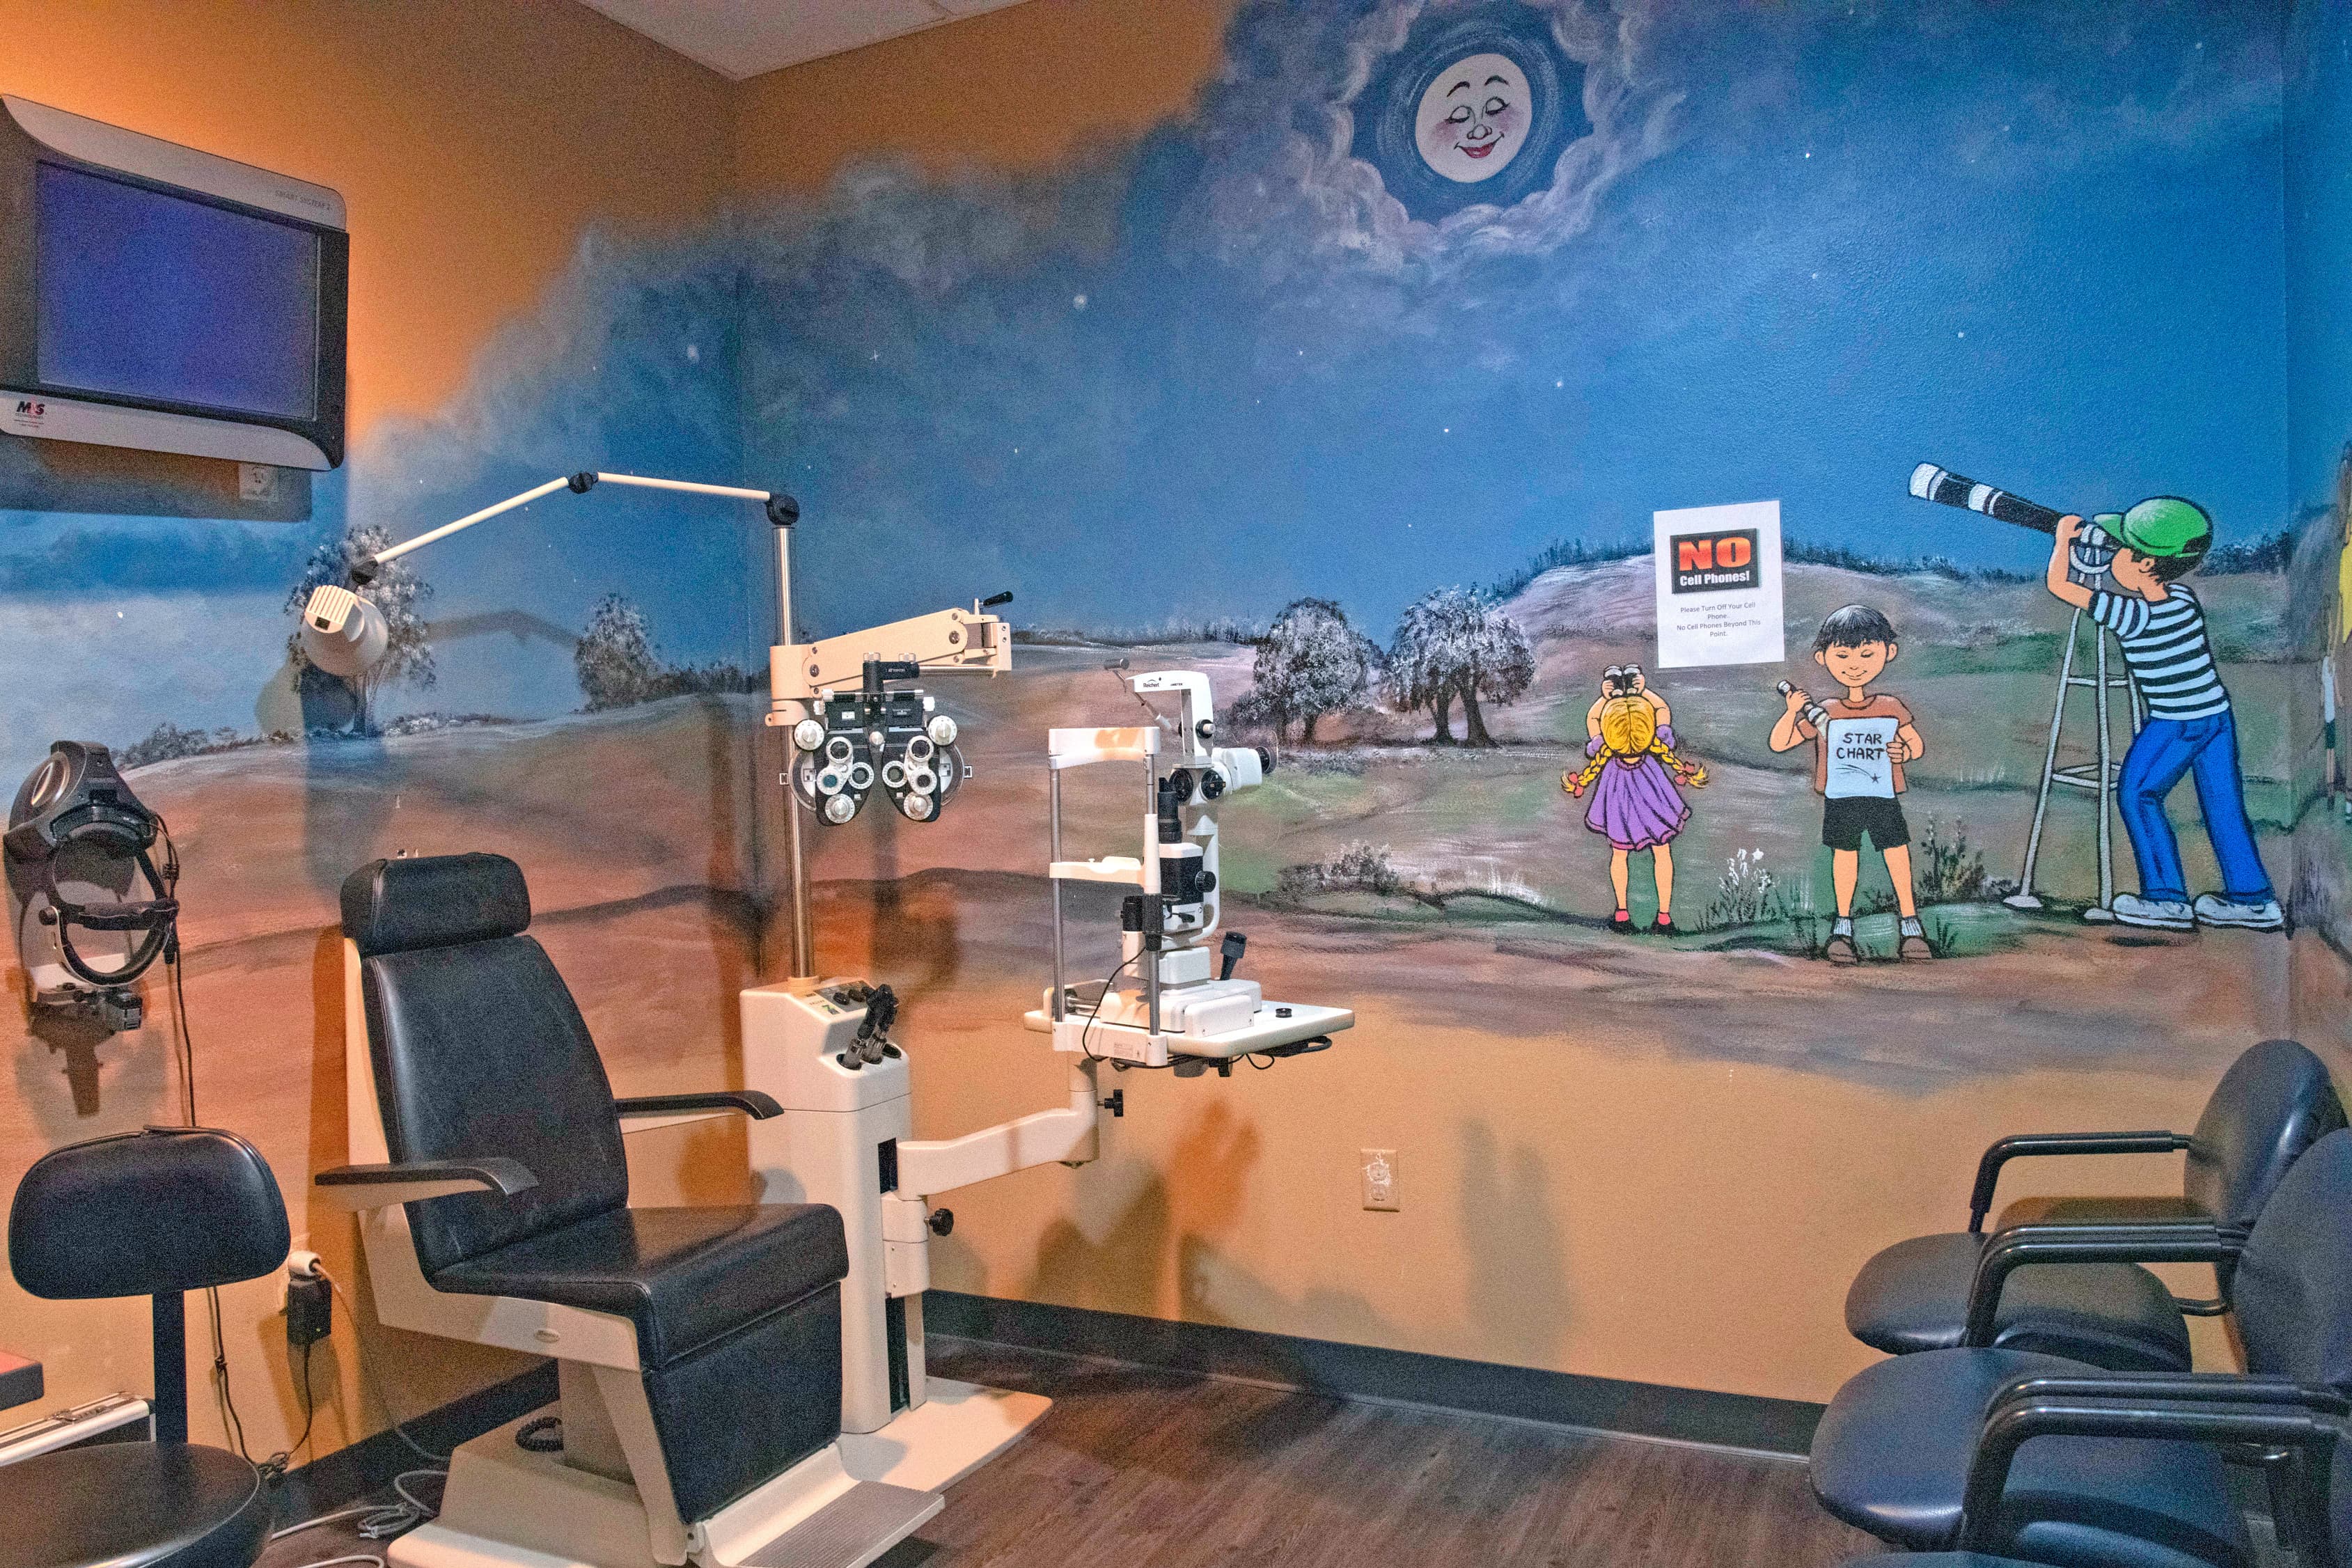 pediatric vision exam room with colorful wall mural and one optometrist chair